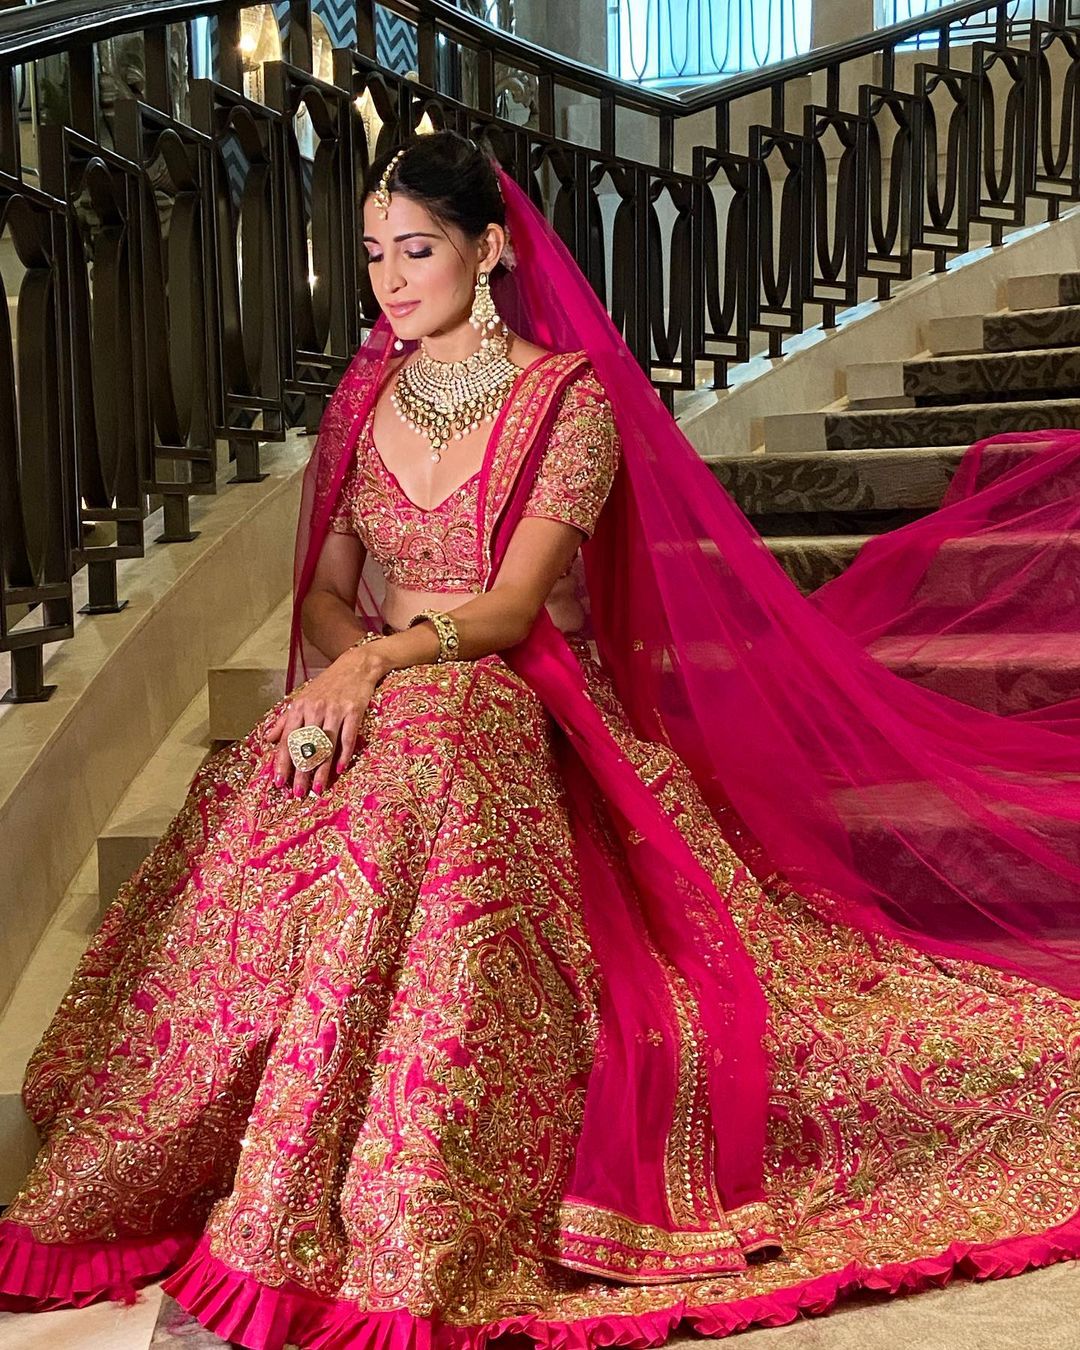 Aahana Kumra is a sight to behold in the ornate pink and golden lehenga